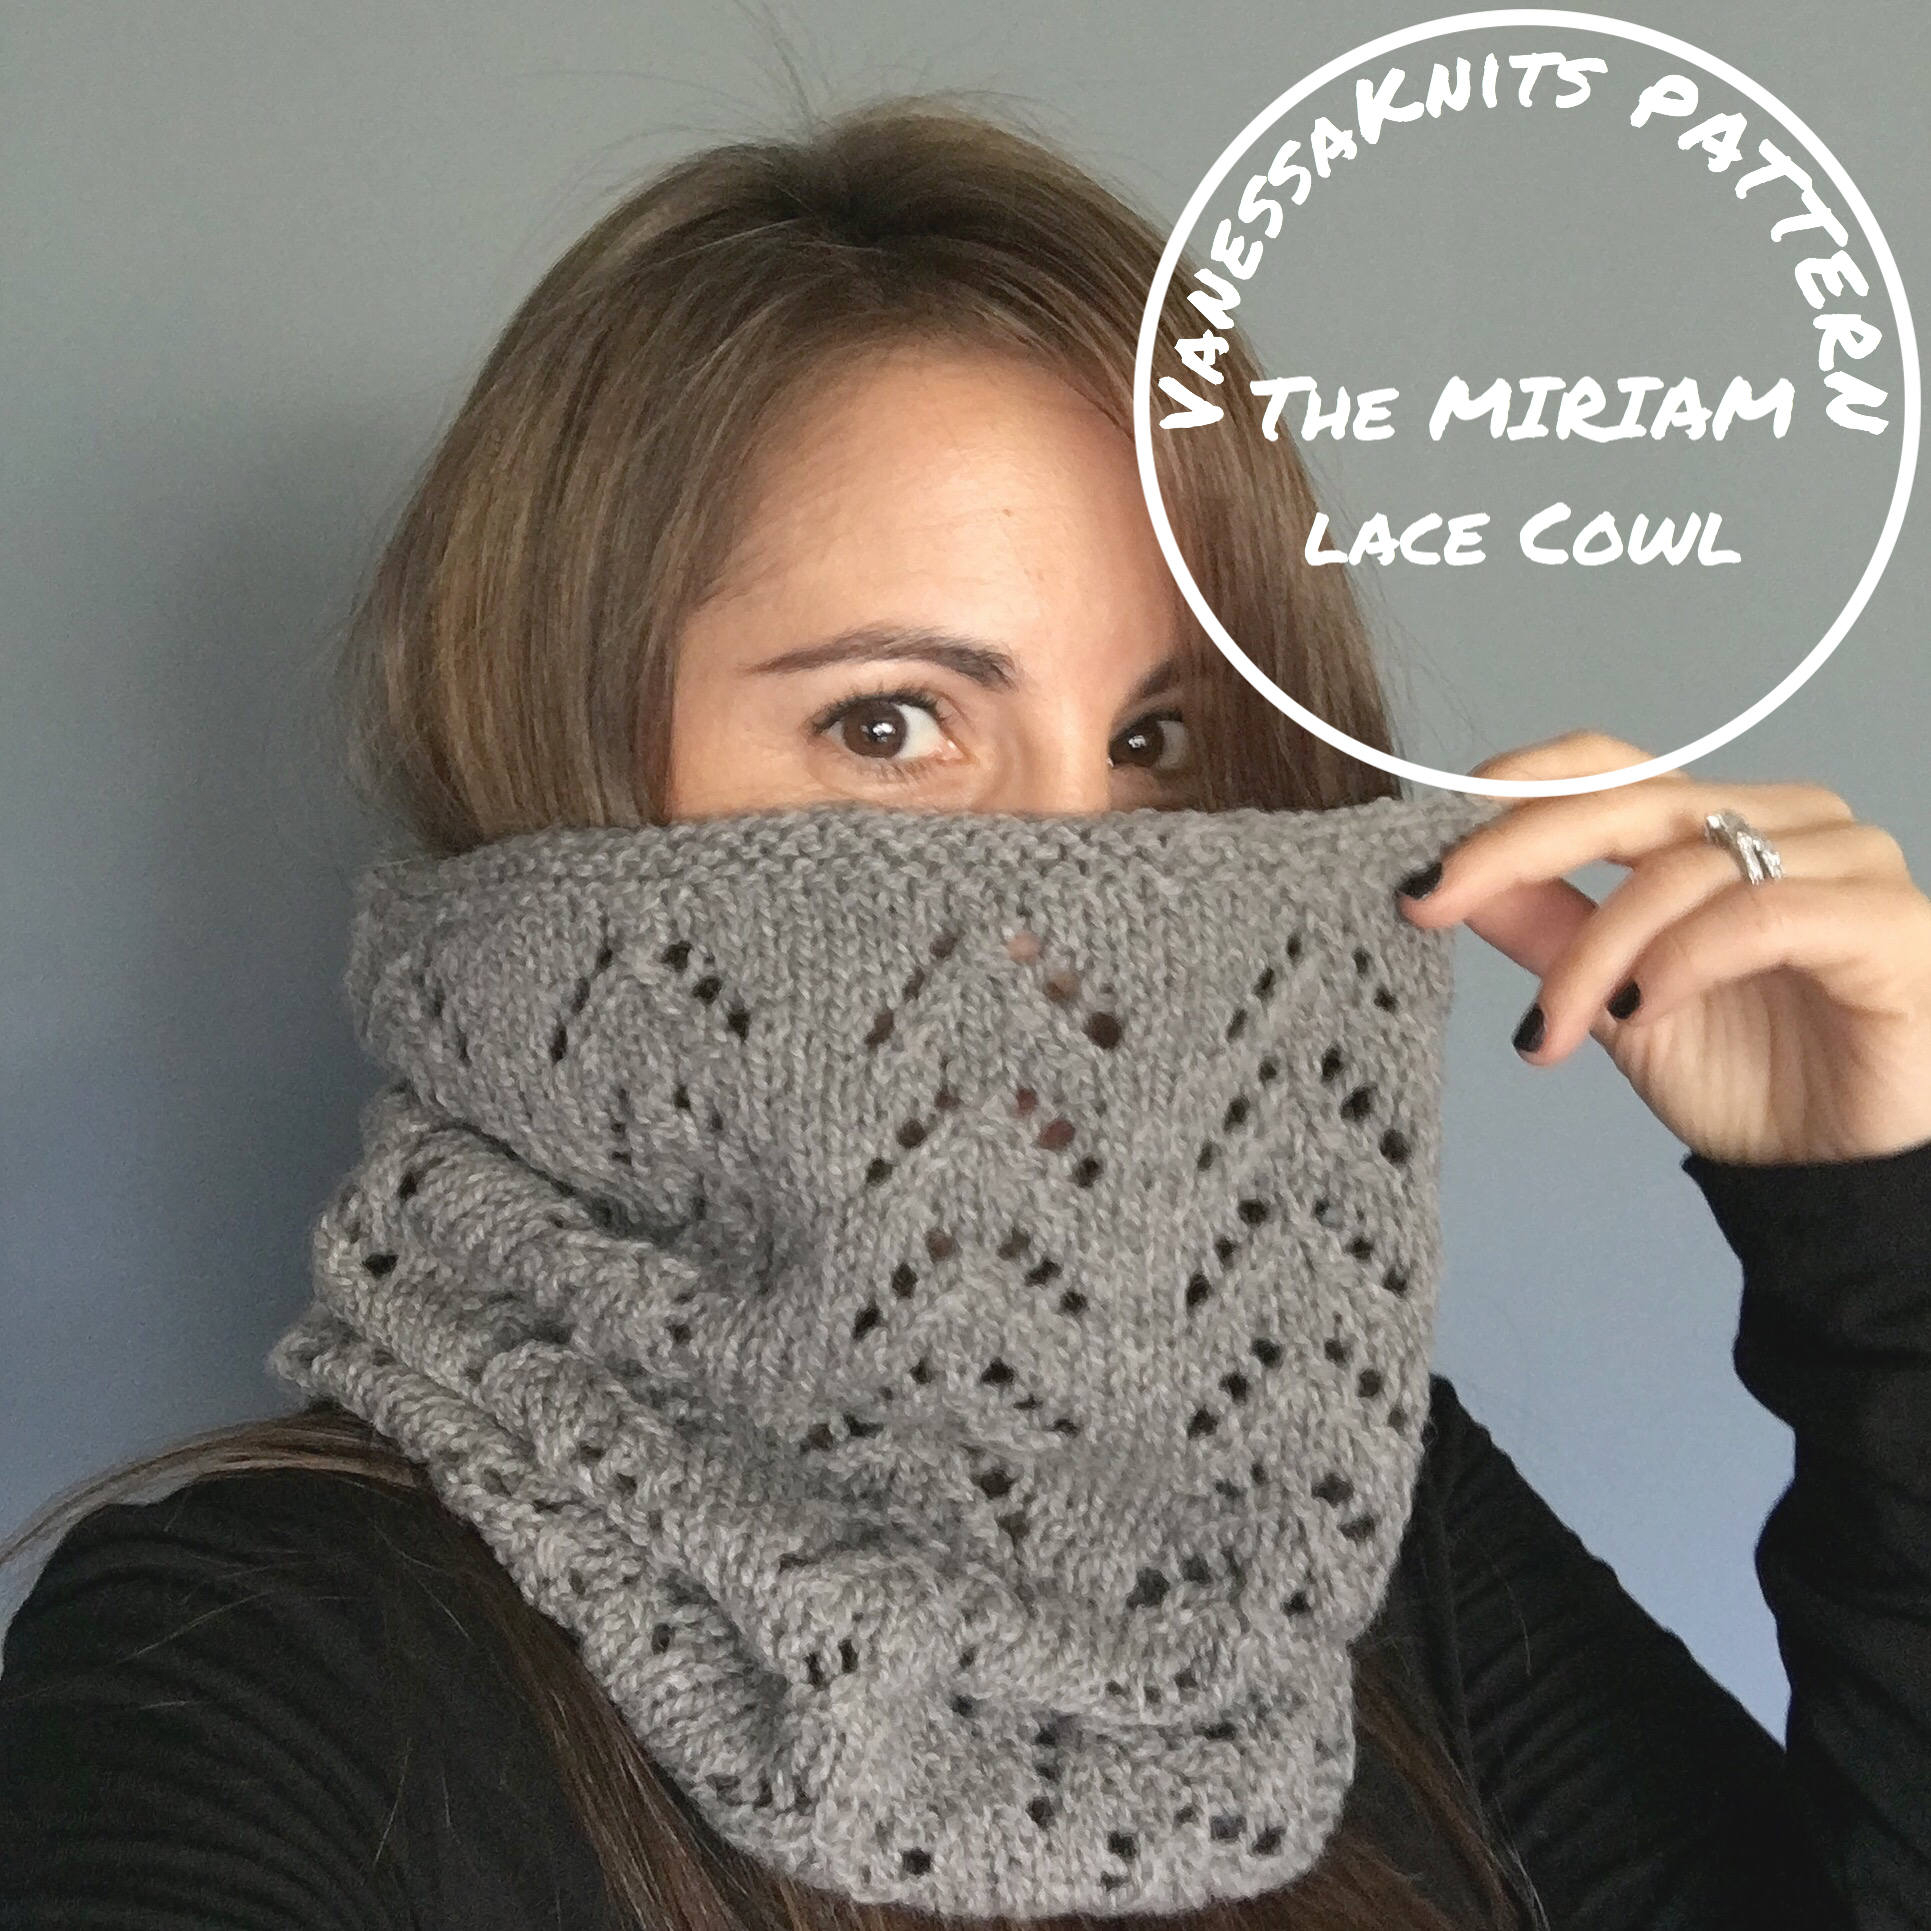 Knit Lace Cowl Pattern Knitting Pattern The Miriam Classic Lace Cowl Includes